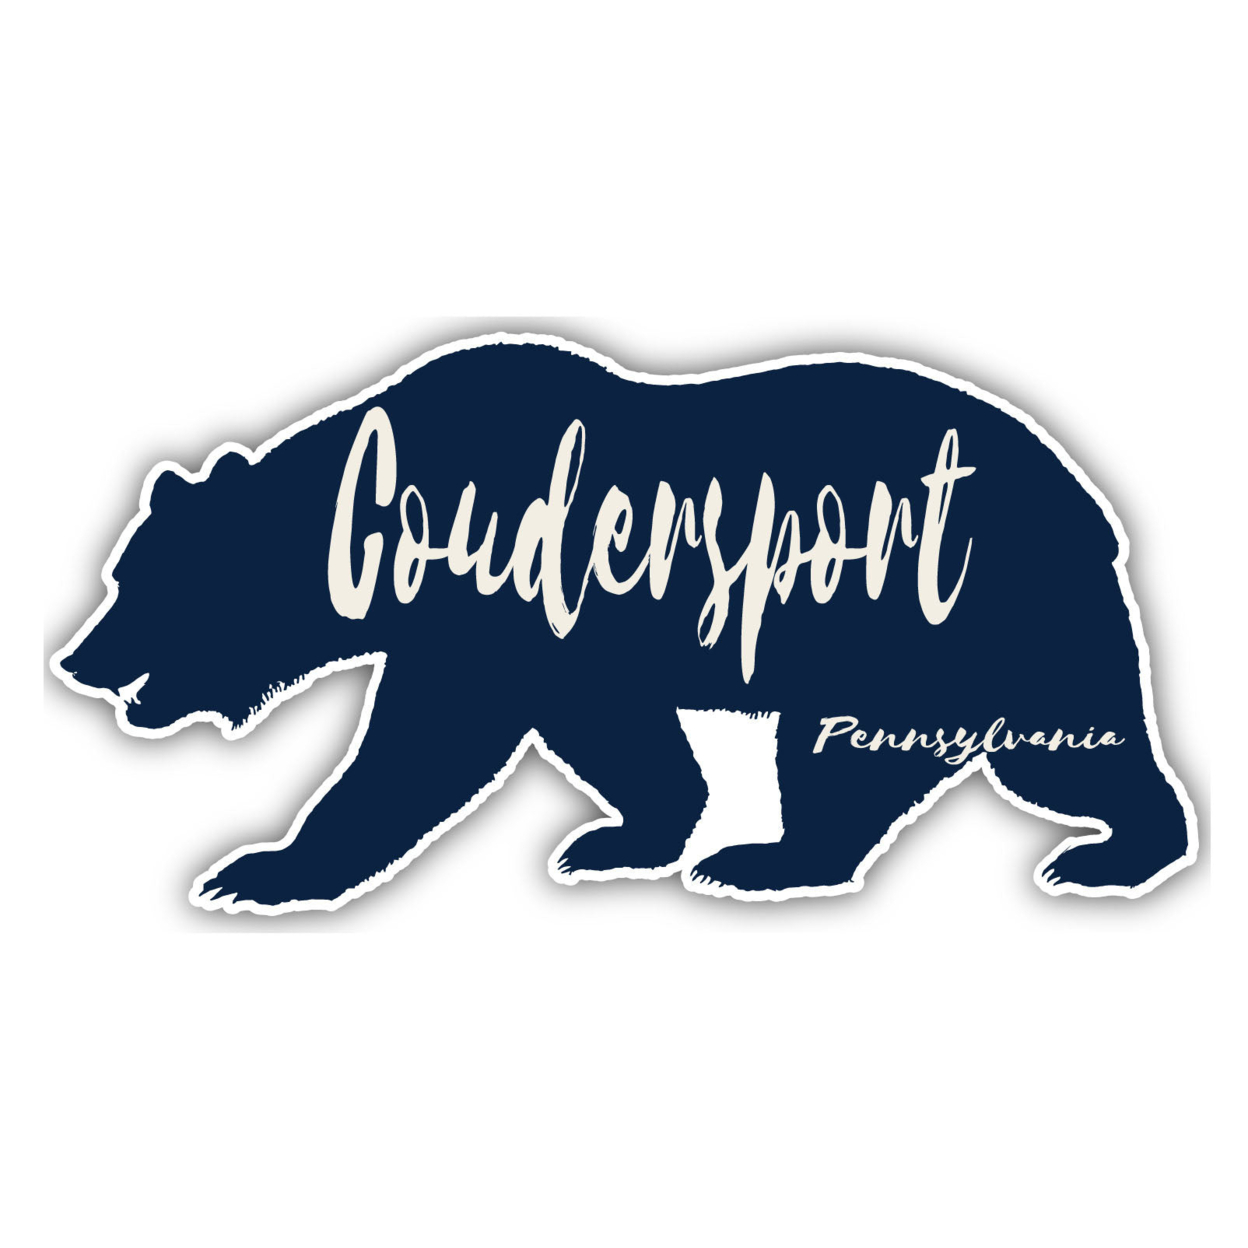 Coudersport Pennsylvania Souvenir Decorative Stickers (Choose Theme And Size) - 4-Pack, 6-Inch, Bear